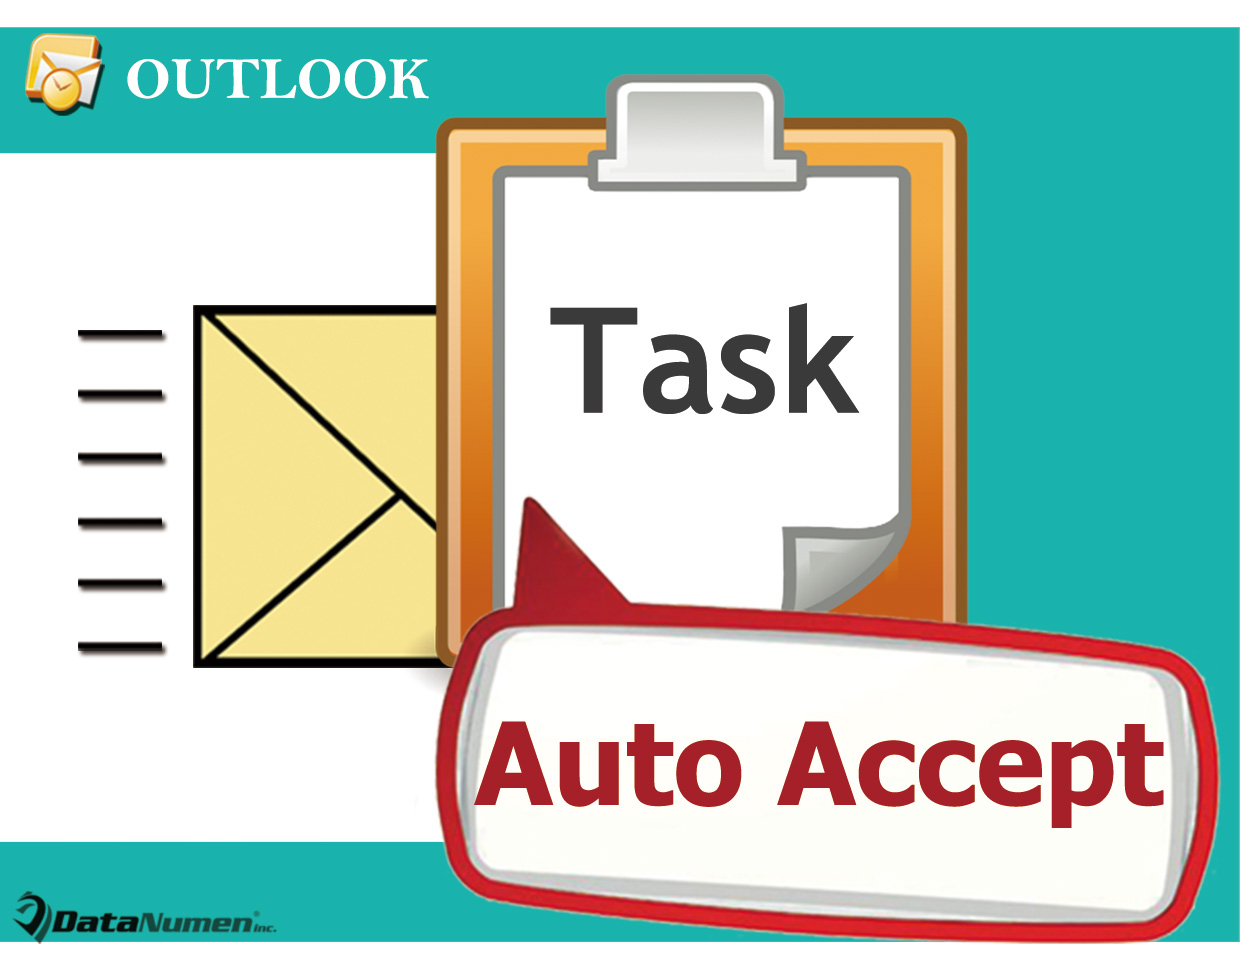 Auto Accept All Incoming Task Requests in Your Outlook